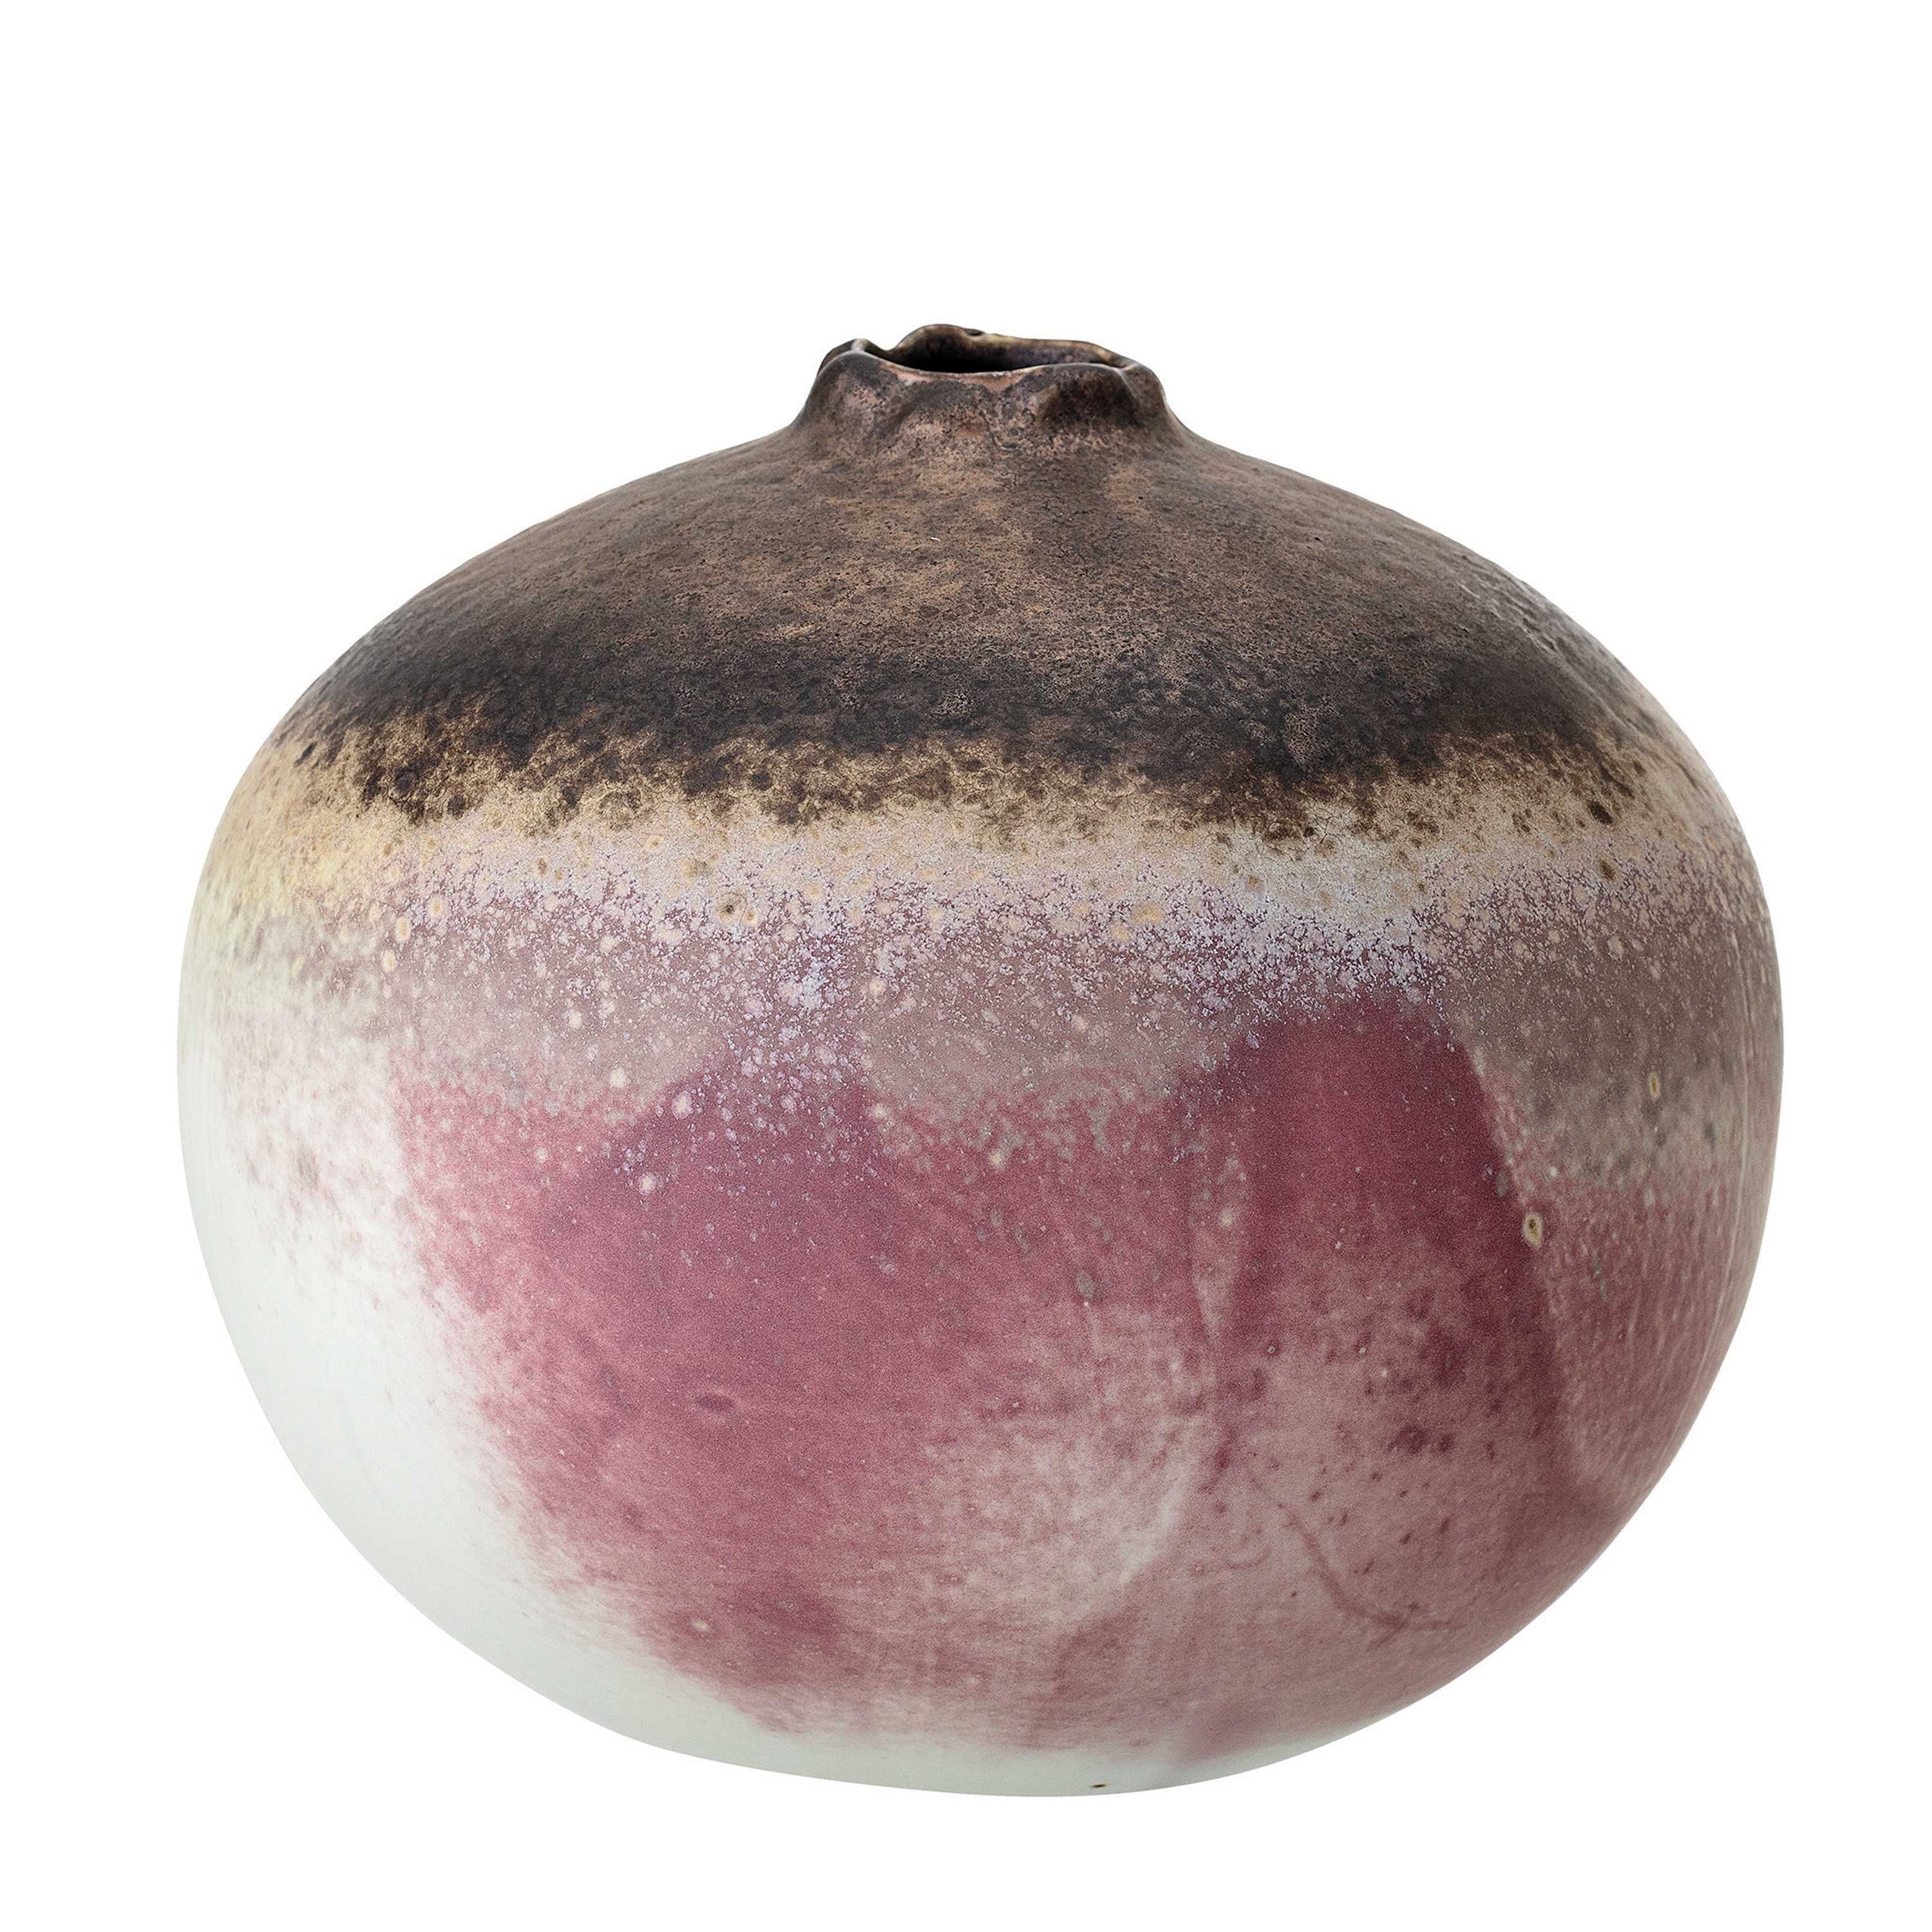 Large Brown, Plum & Cream Stoneware Vase with Reactive Glaze Finish (Each one will vary) - Image 0